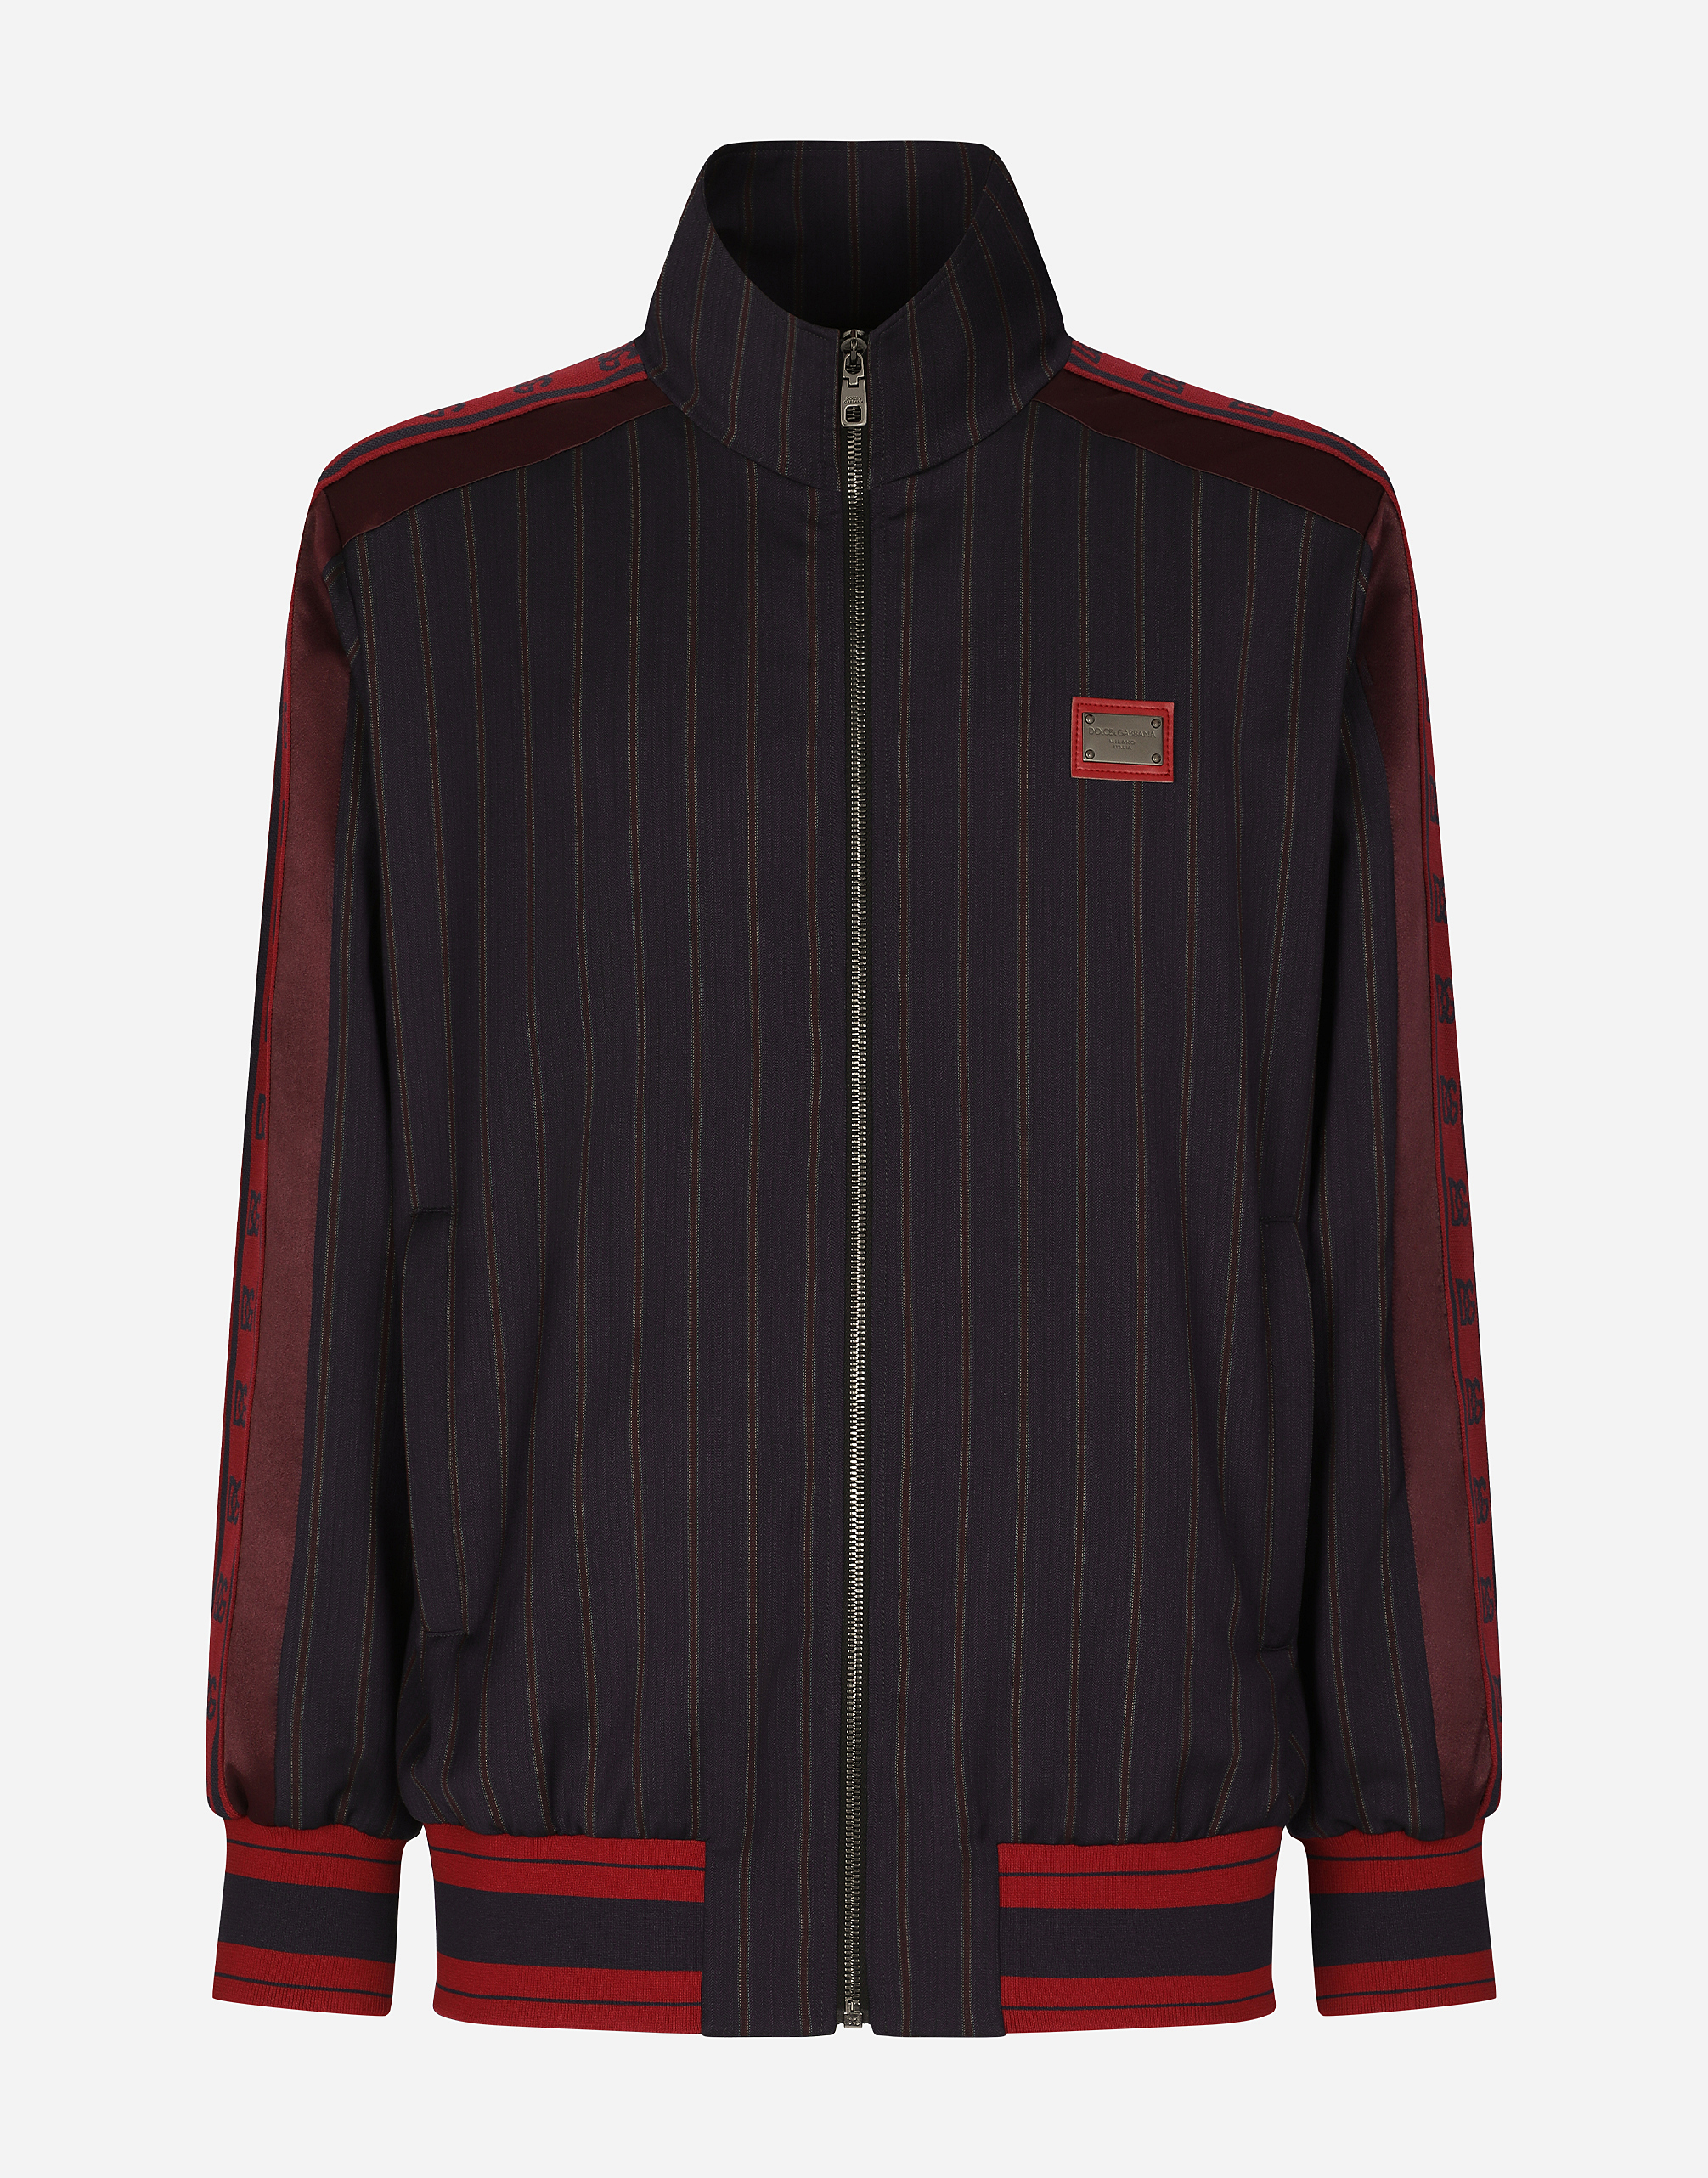 DOLCE & GABBANA PINSTRIPE WOOL JACKET WITH BRANDED TAG